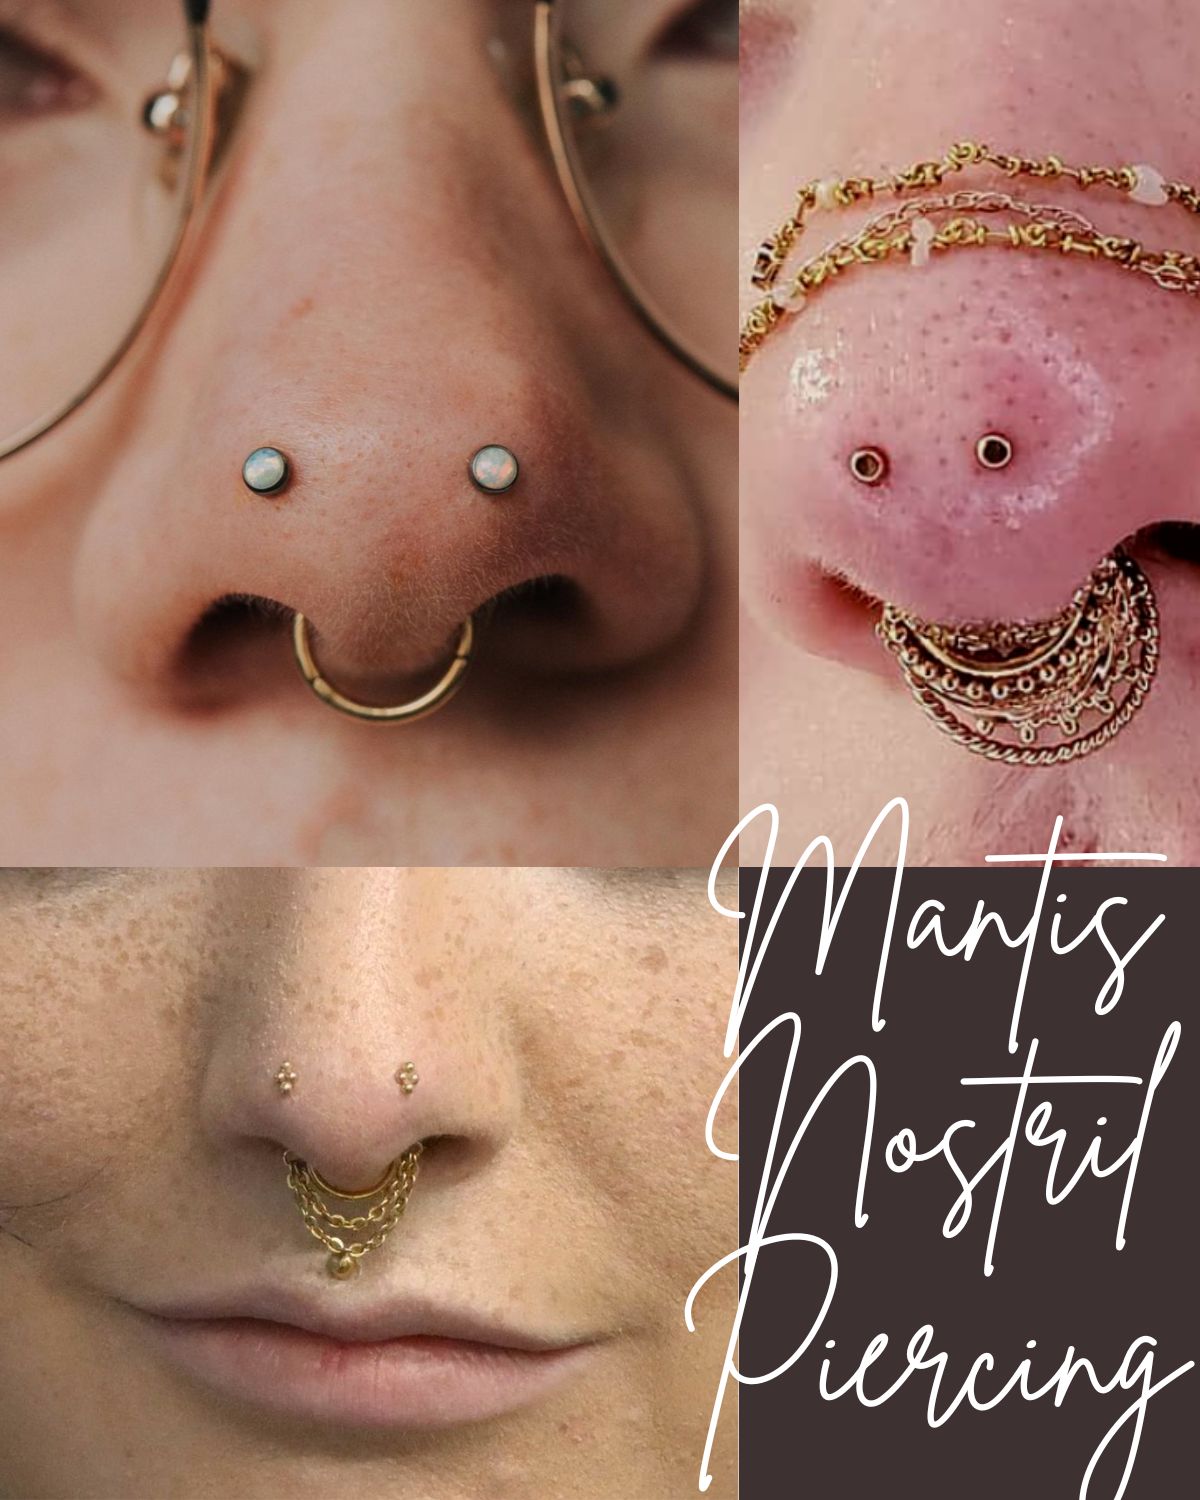 Three people with mantis nostril piercings